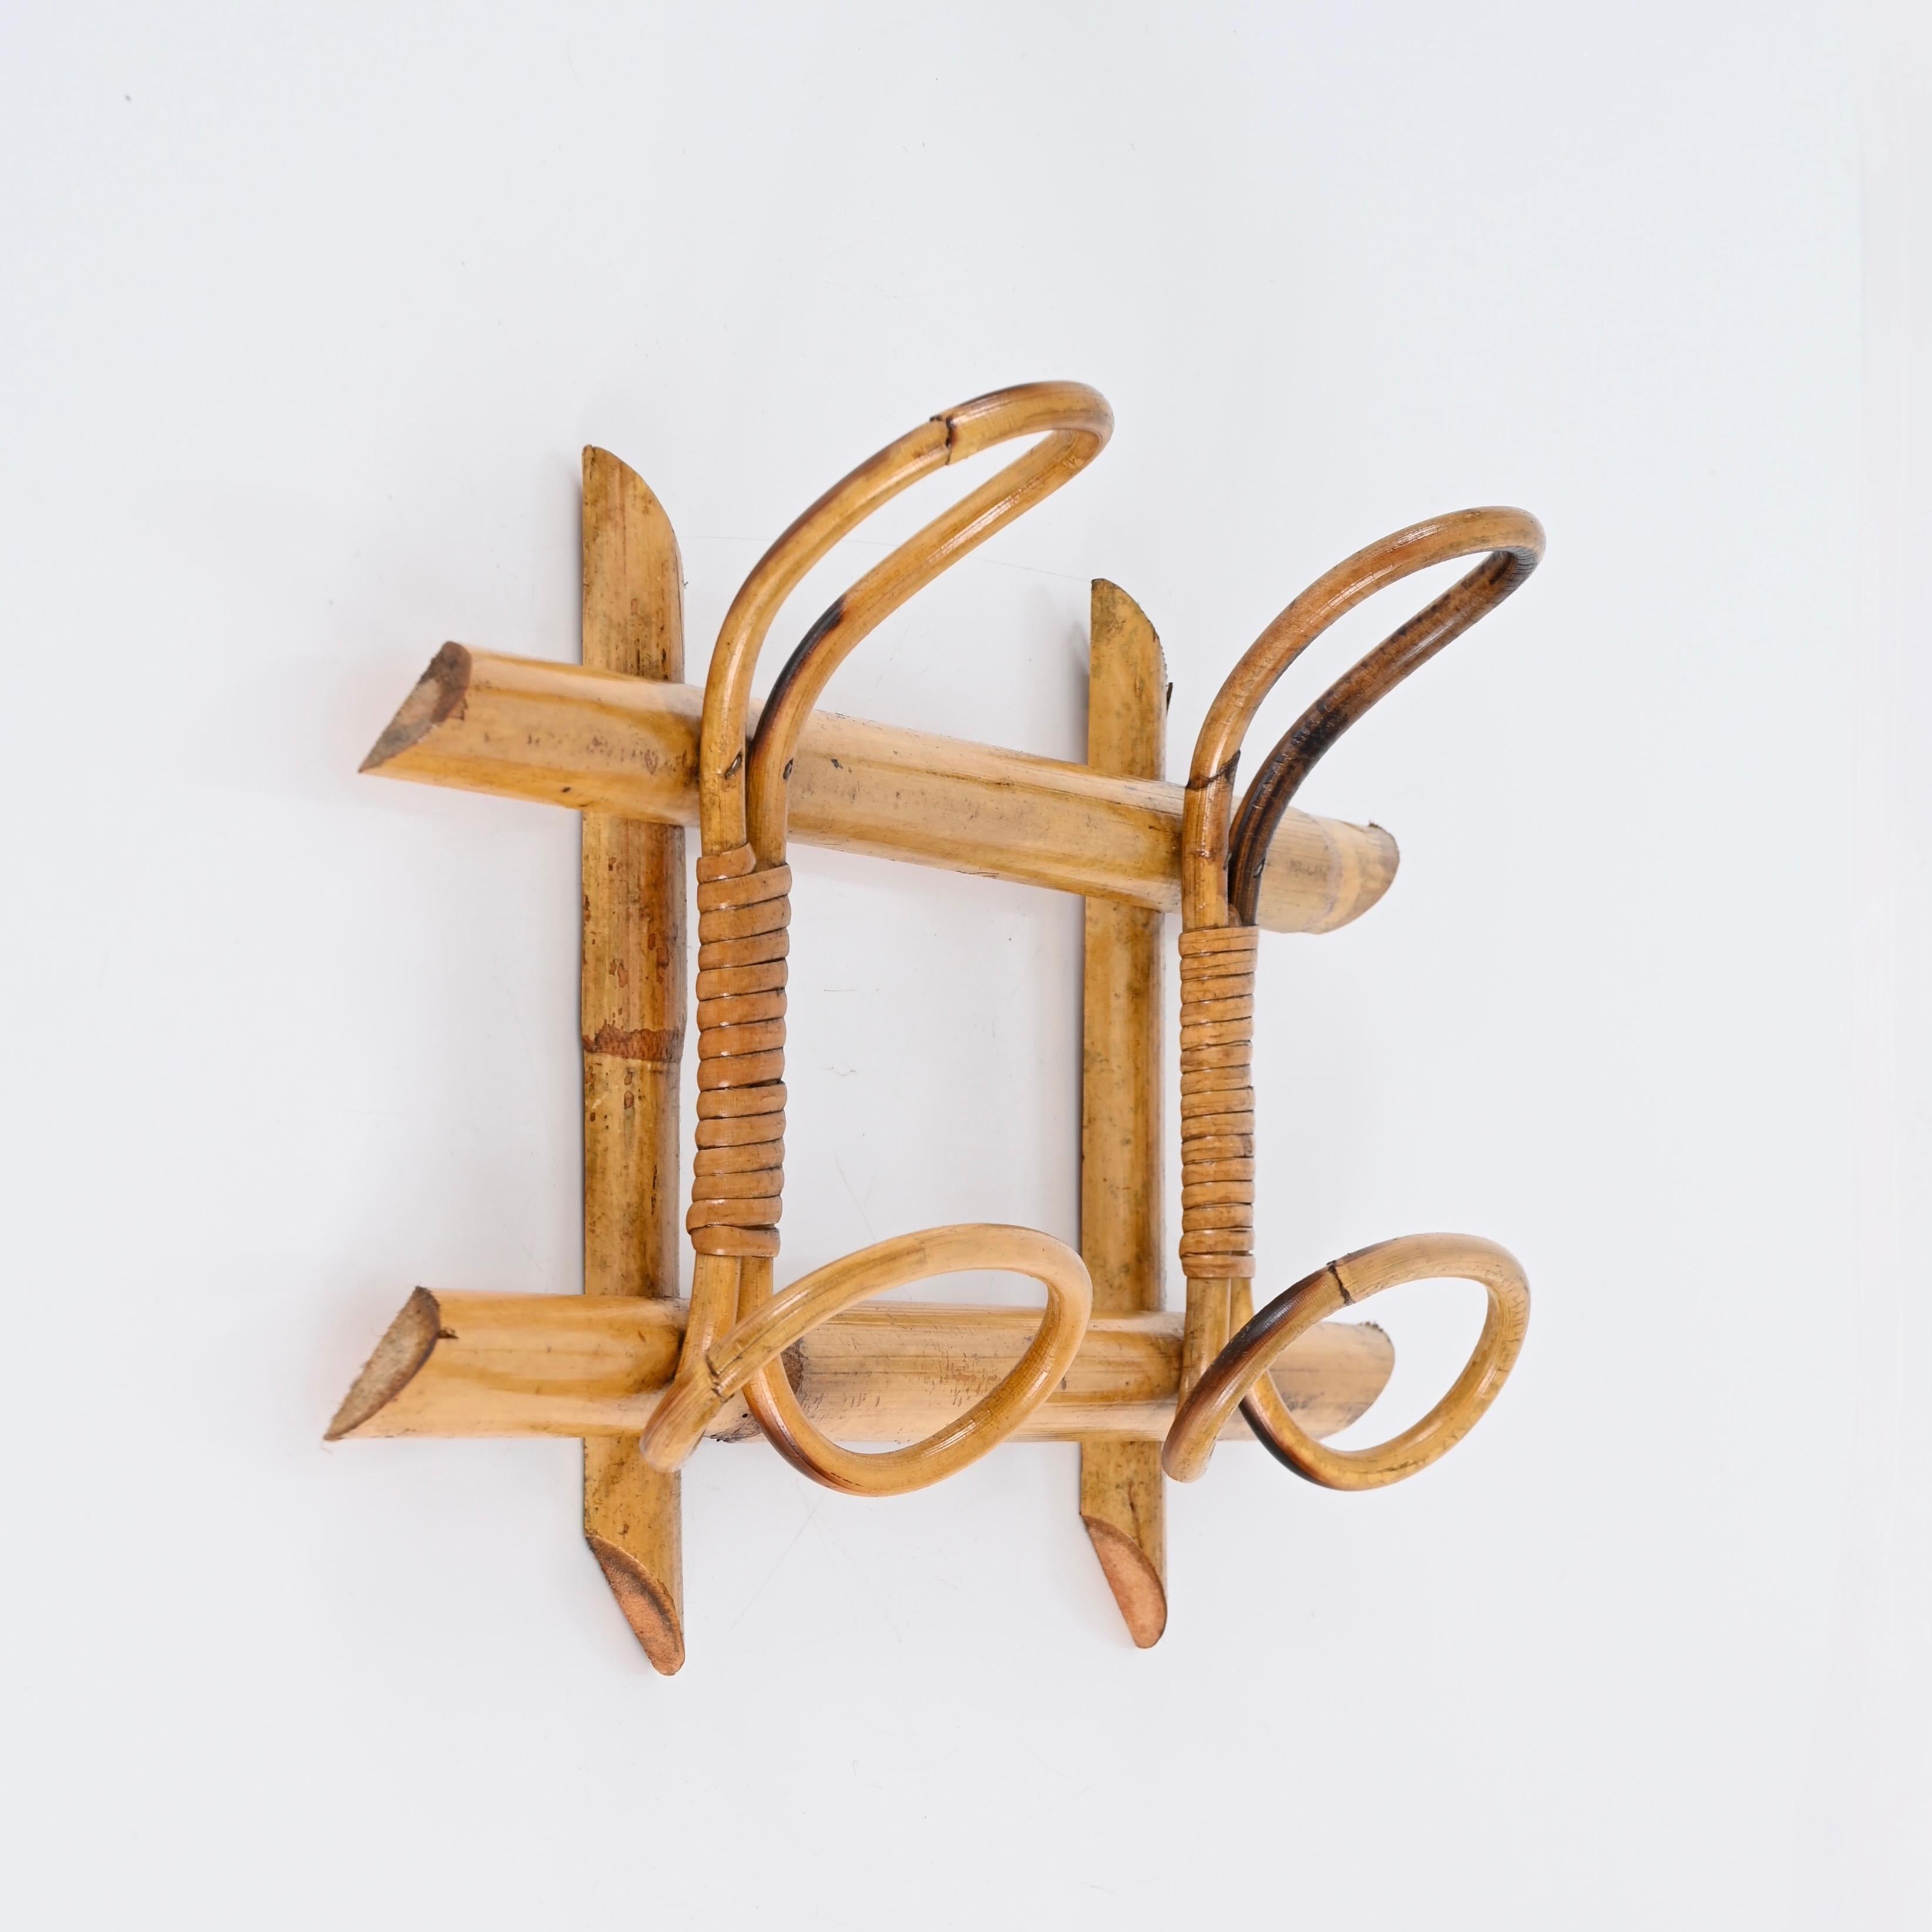 Beautiful Riviera style wall hanger, fully made in curved rattan, bamboo and wicker. This lovely French Riviera coat rack was realized in Italy in the 1960s. 

This stunning item features a structure in bamboo canes and two curved rattan upper hooks